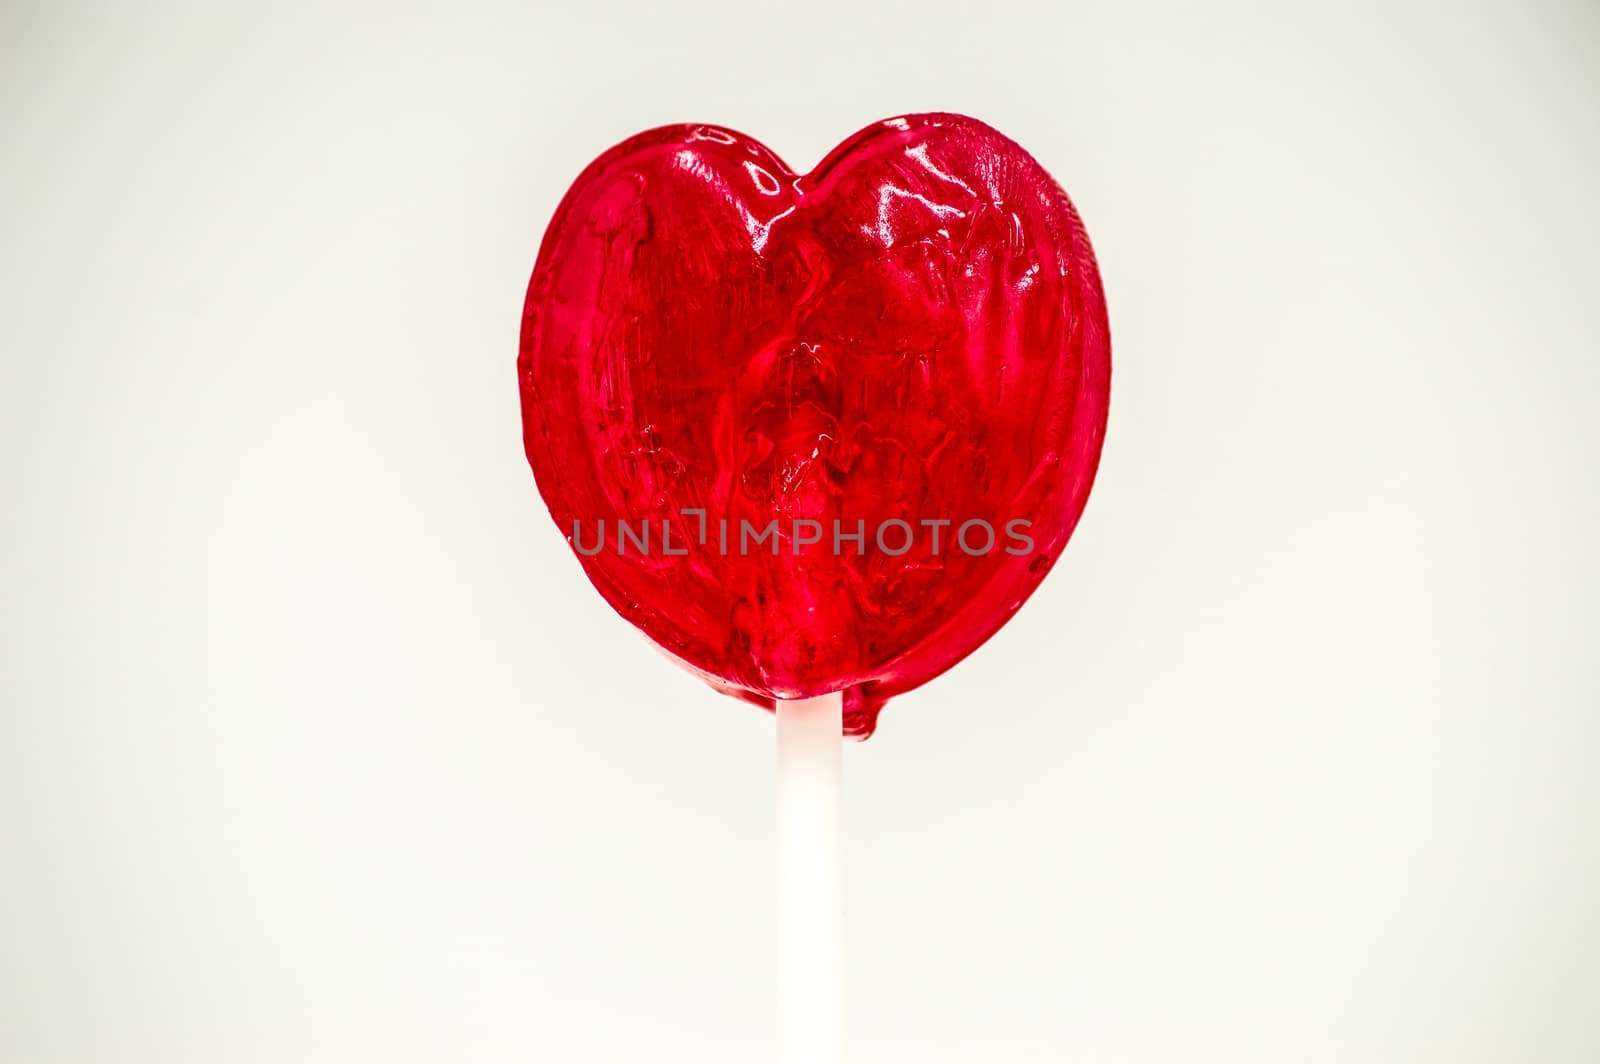 Heart shaped red lollipop on a white background